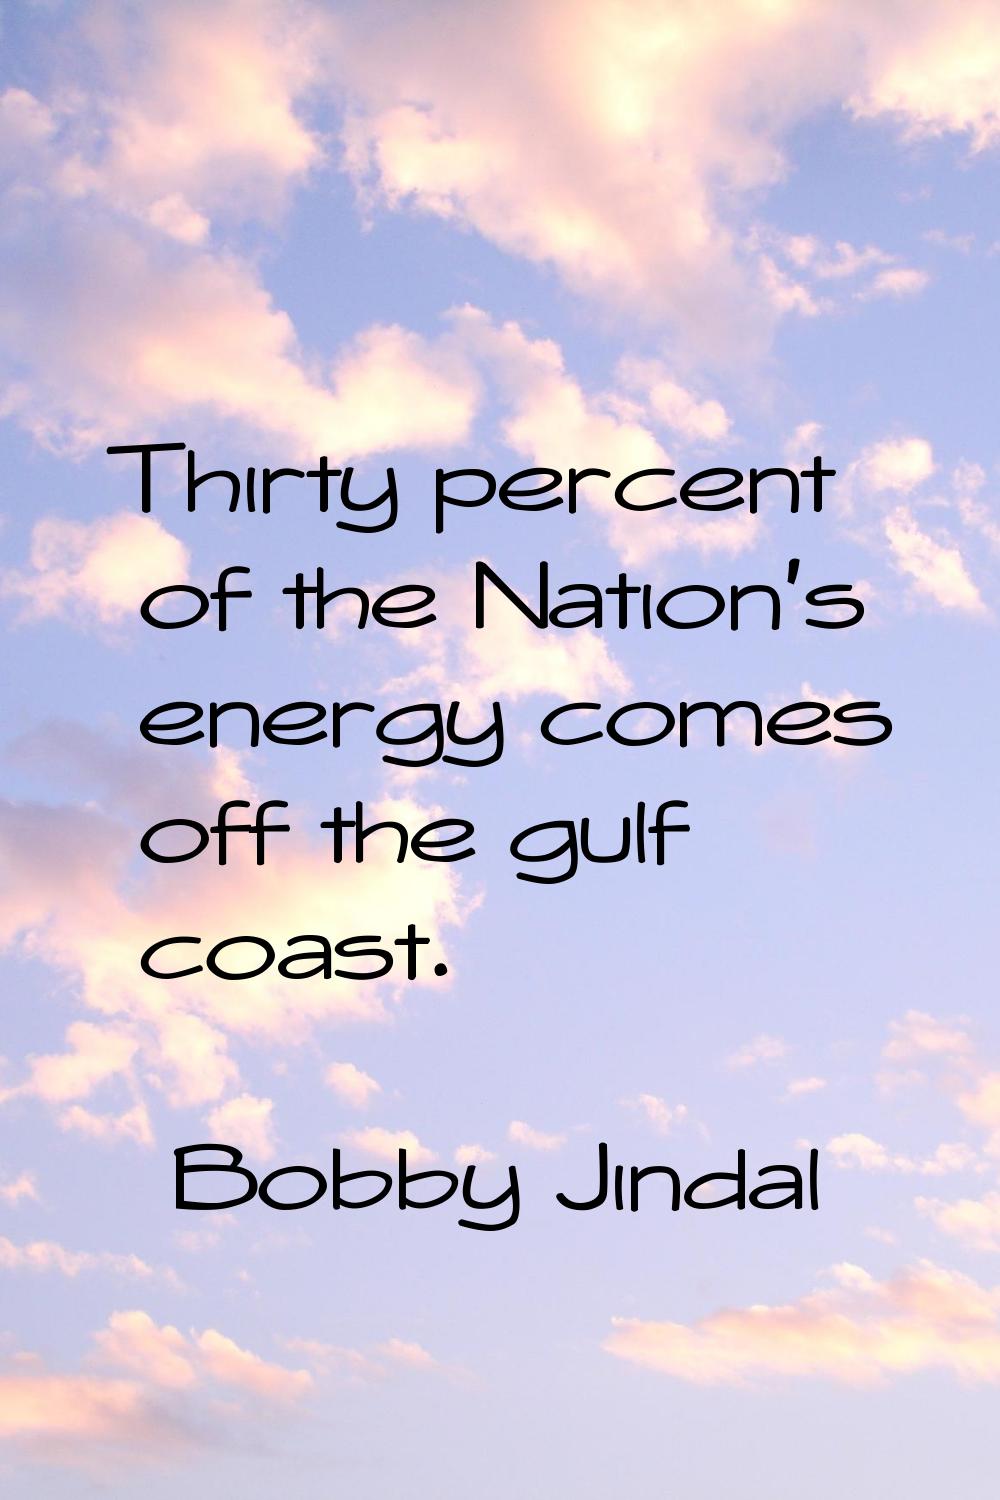 Thirty percent of the Nation's energy comes off the gulf coast.